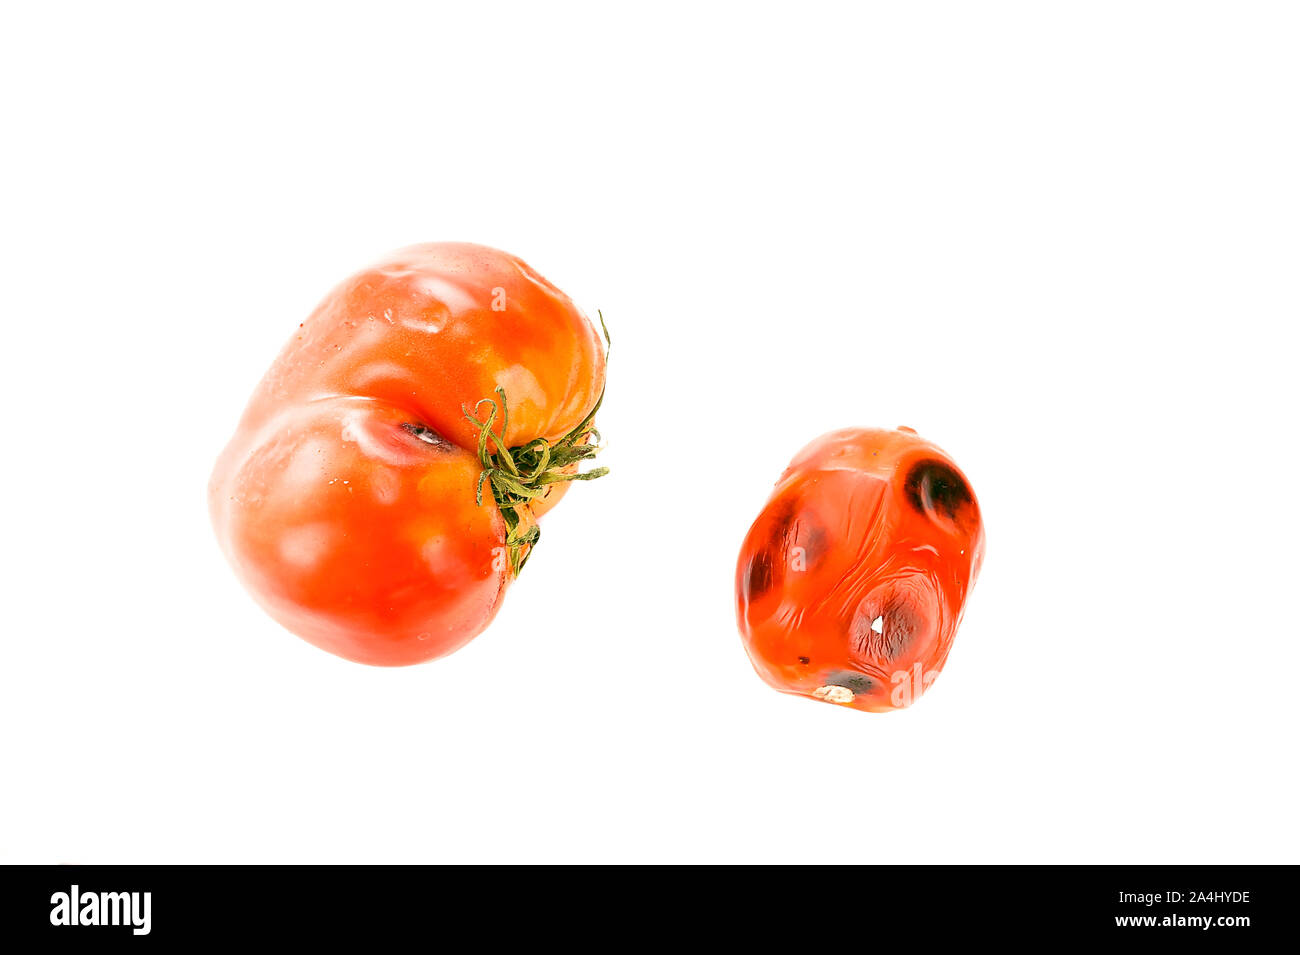 https://c8.alamy.com/comp/2A4HYDE/little-and-big-rotten-spoiled-tomatoes-with-mold-spots-on-skin-sepals-or-calyx-and-uneven-ripening-isolated-on-white-background-2A4HYDE.jpg